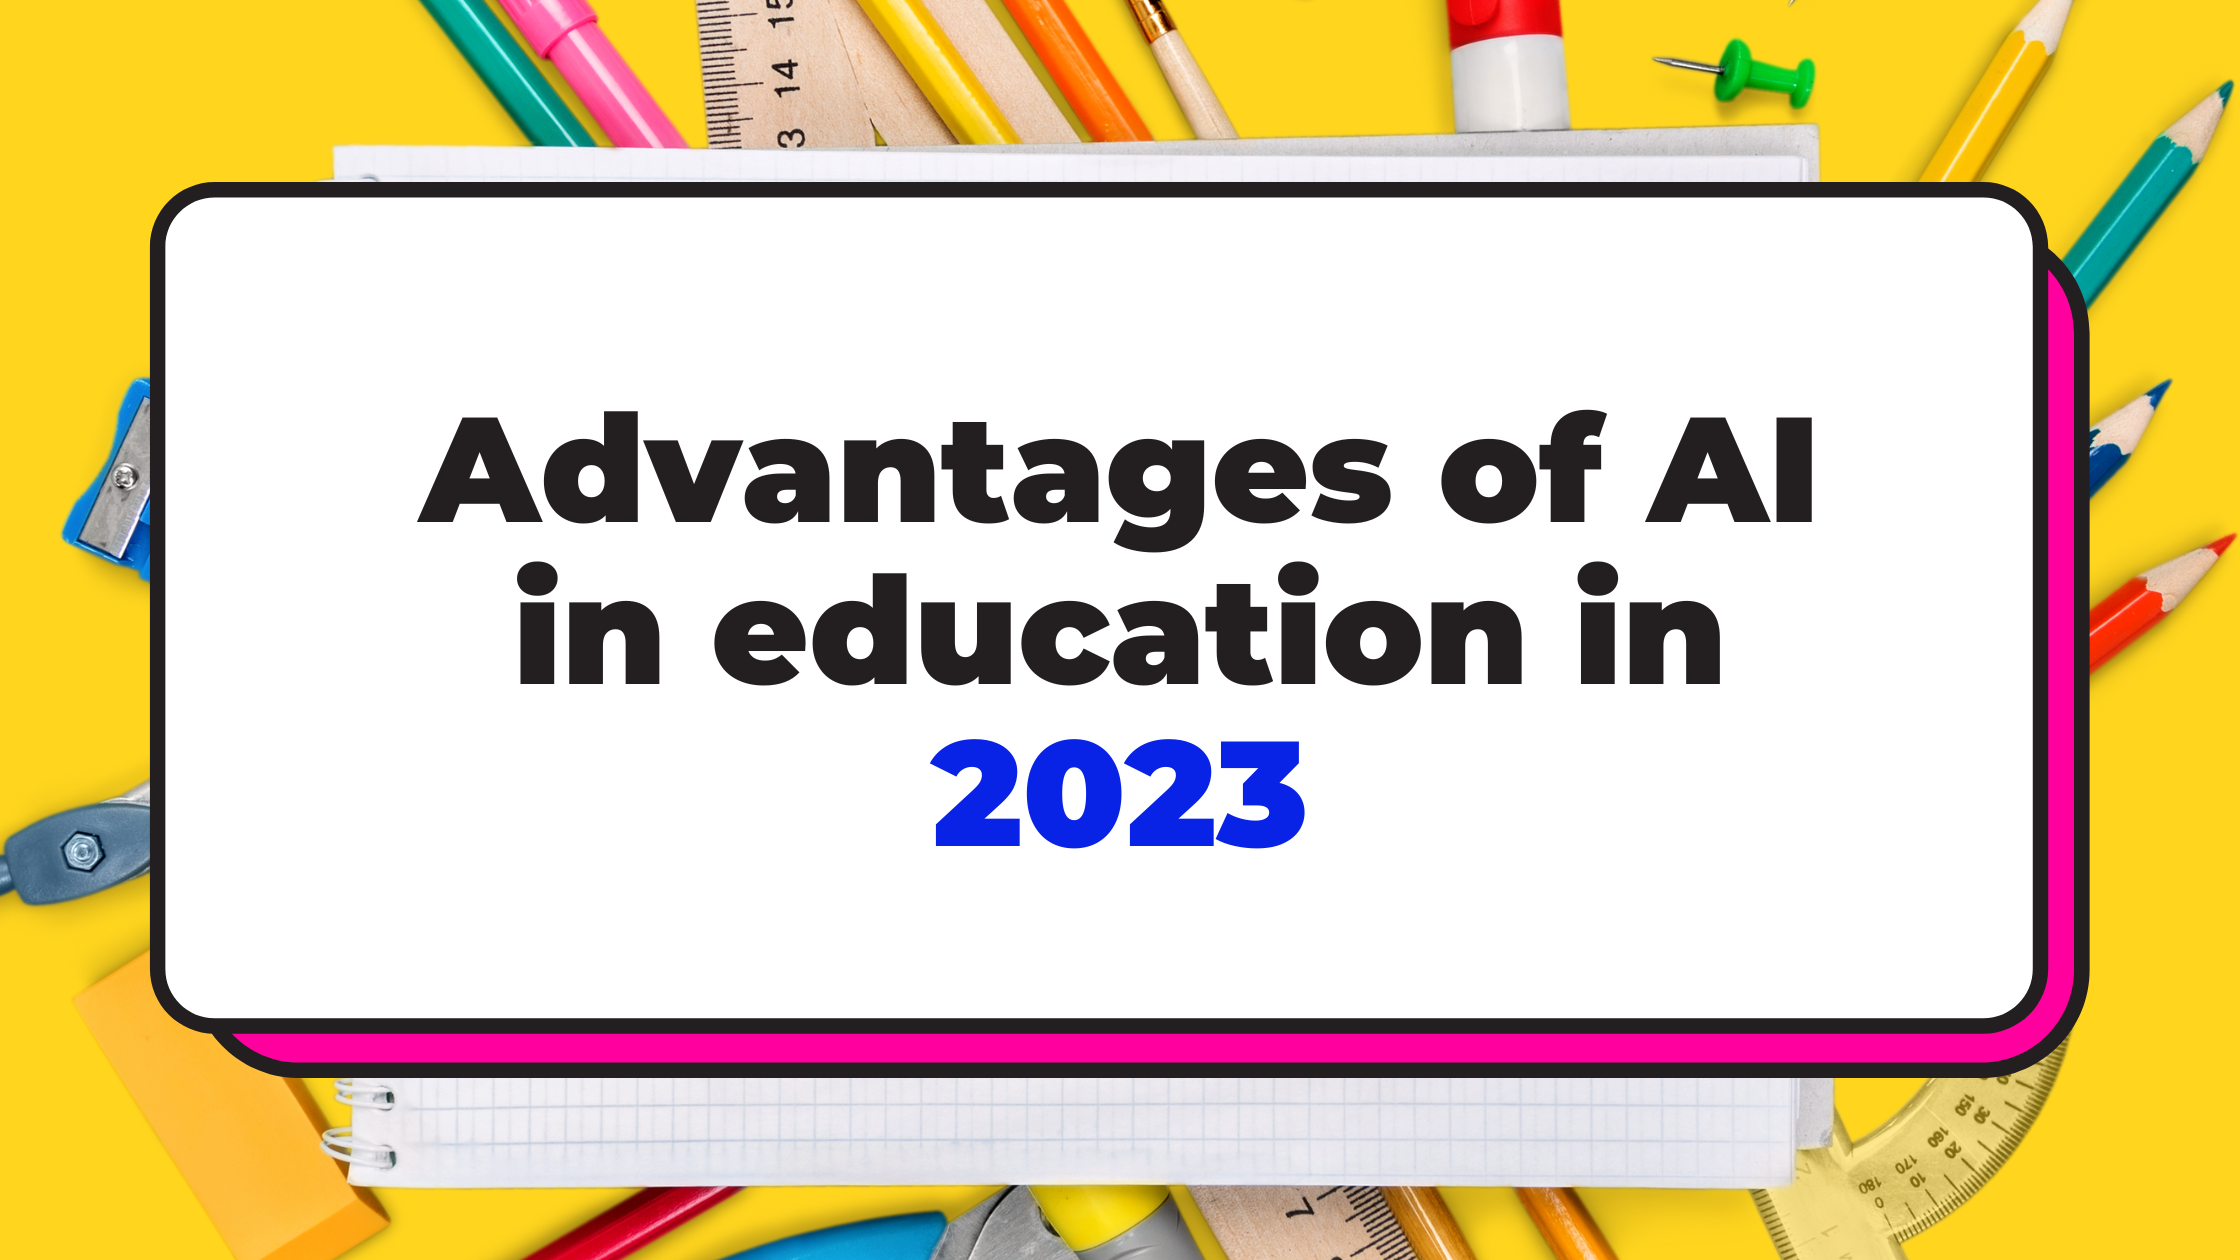 Advantages of AI in education for students (and teachers) in 2023